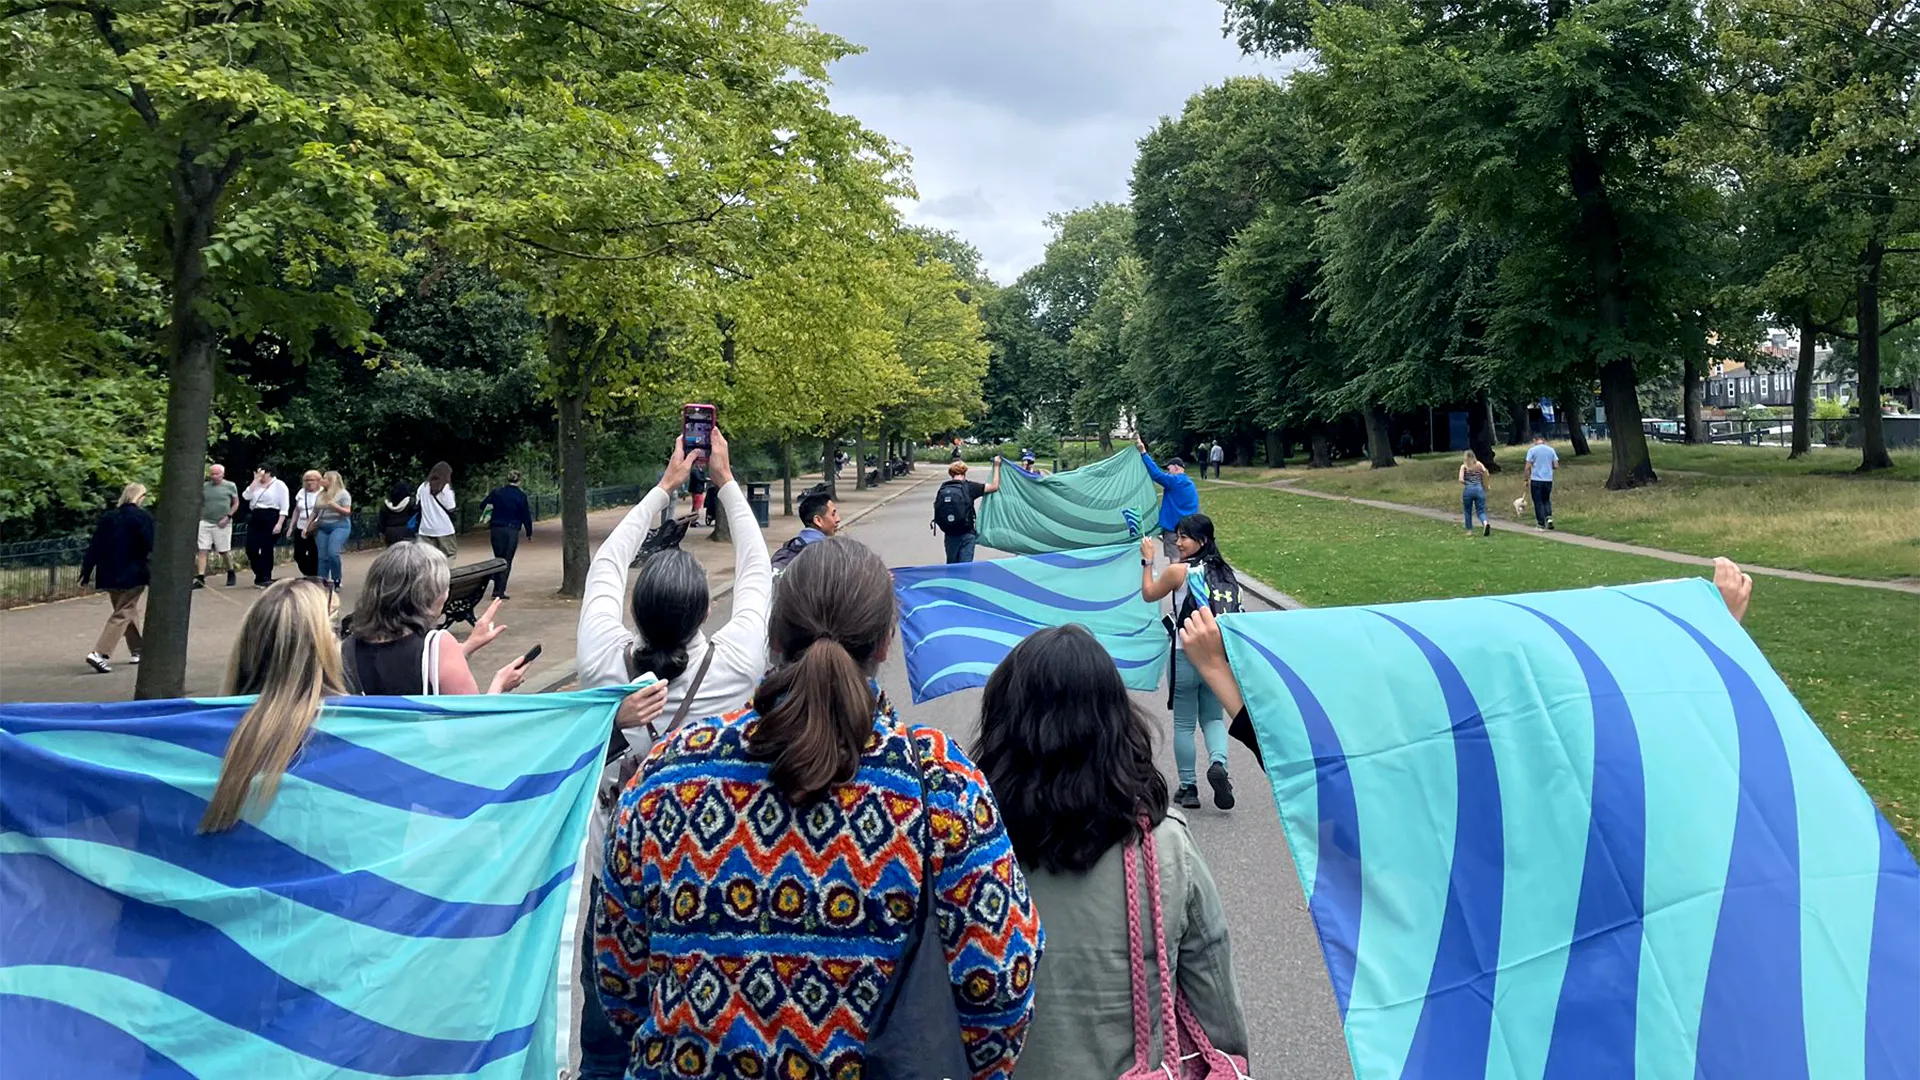 A group of people march down a wide park pathway, waving flags. The flags are seagreen and ultramarine blue waves.